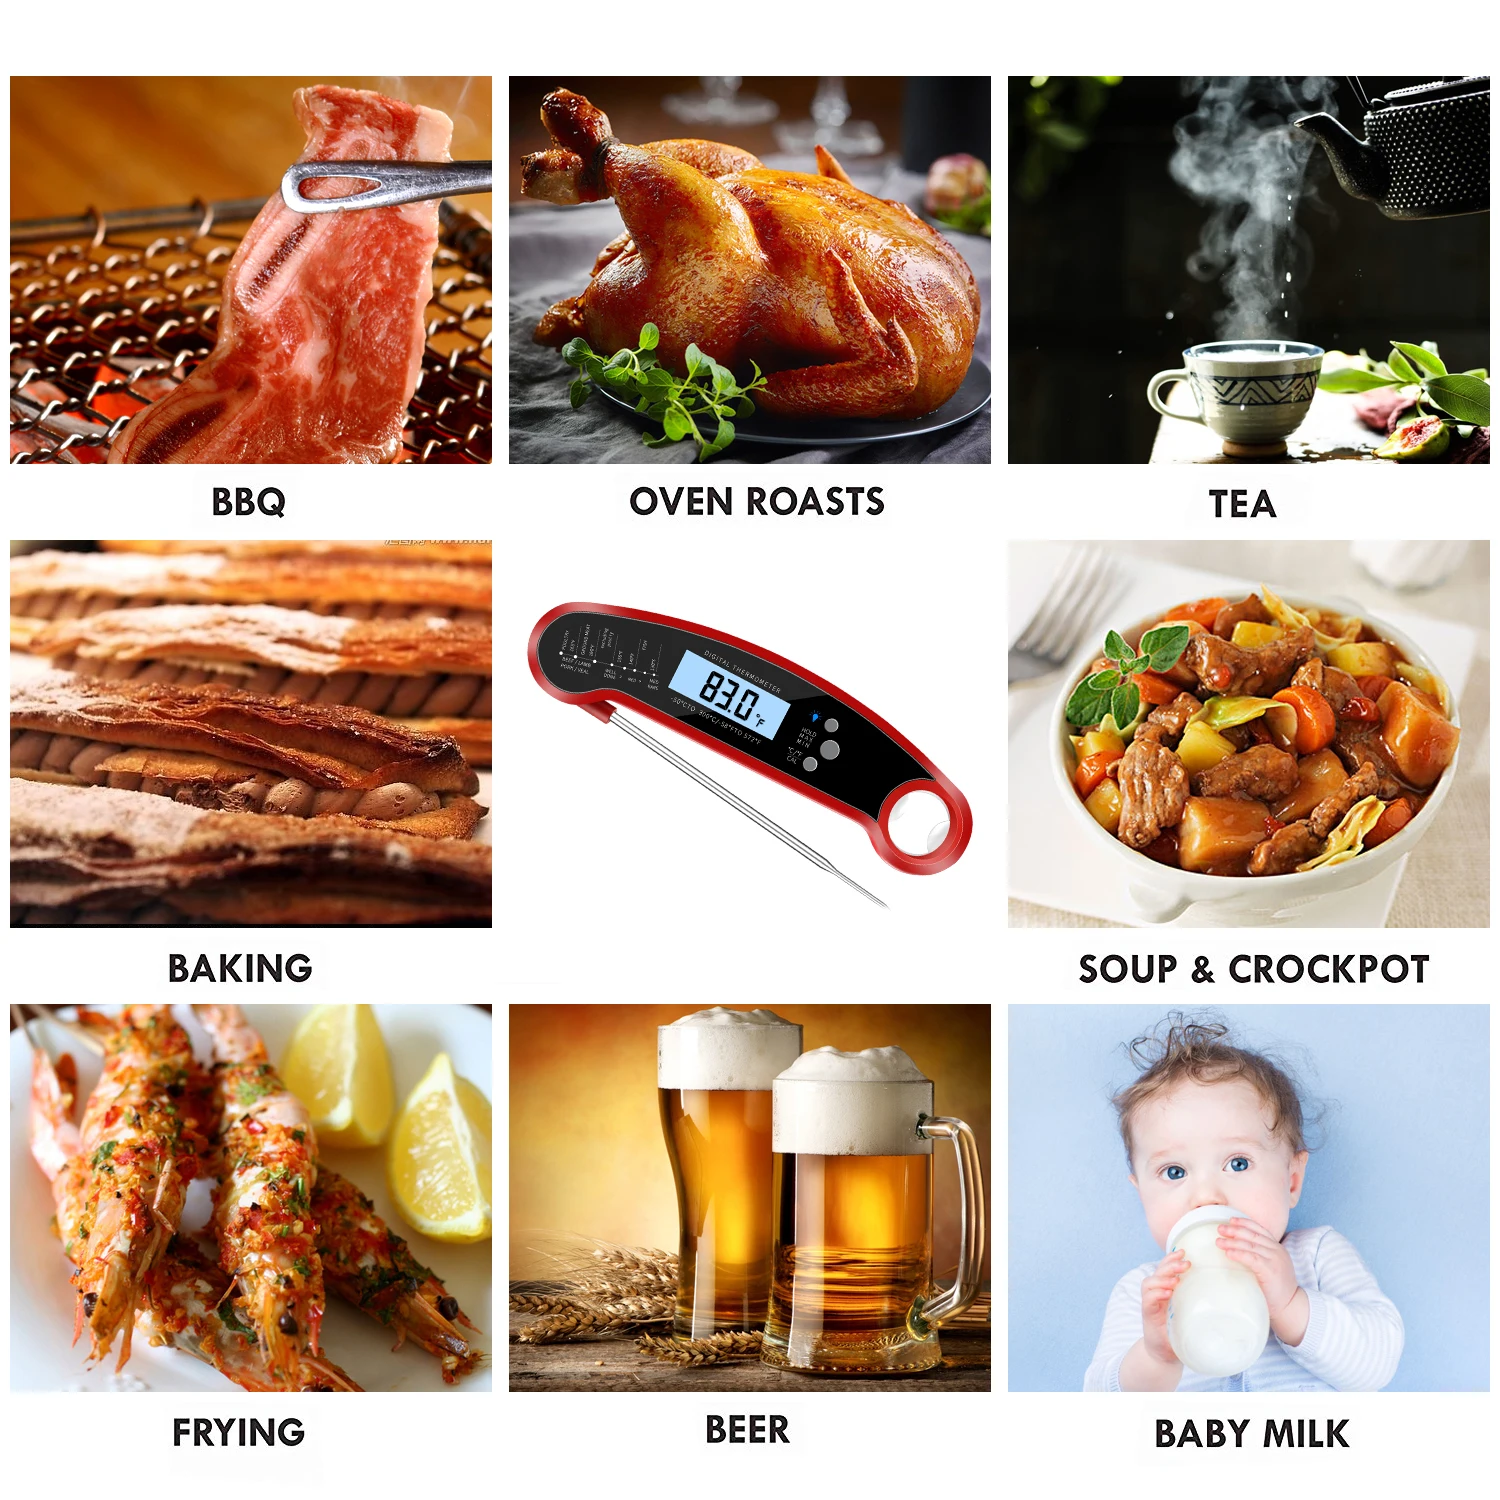 https://ae01.alicdn.com/kf/S578314a91e5240d8a5a3df01efaf96f0c/Digital-BBQ-Kitchen-Food-Thermometer-For-Meat-Water-Milk-Cooking-Food-Probe-Electronic-Oven-Waterproof-Thermometer.jpg